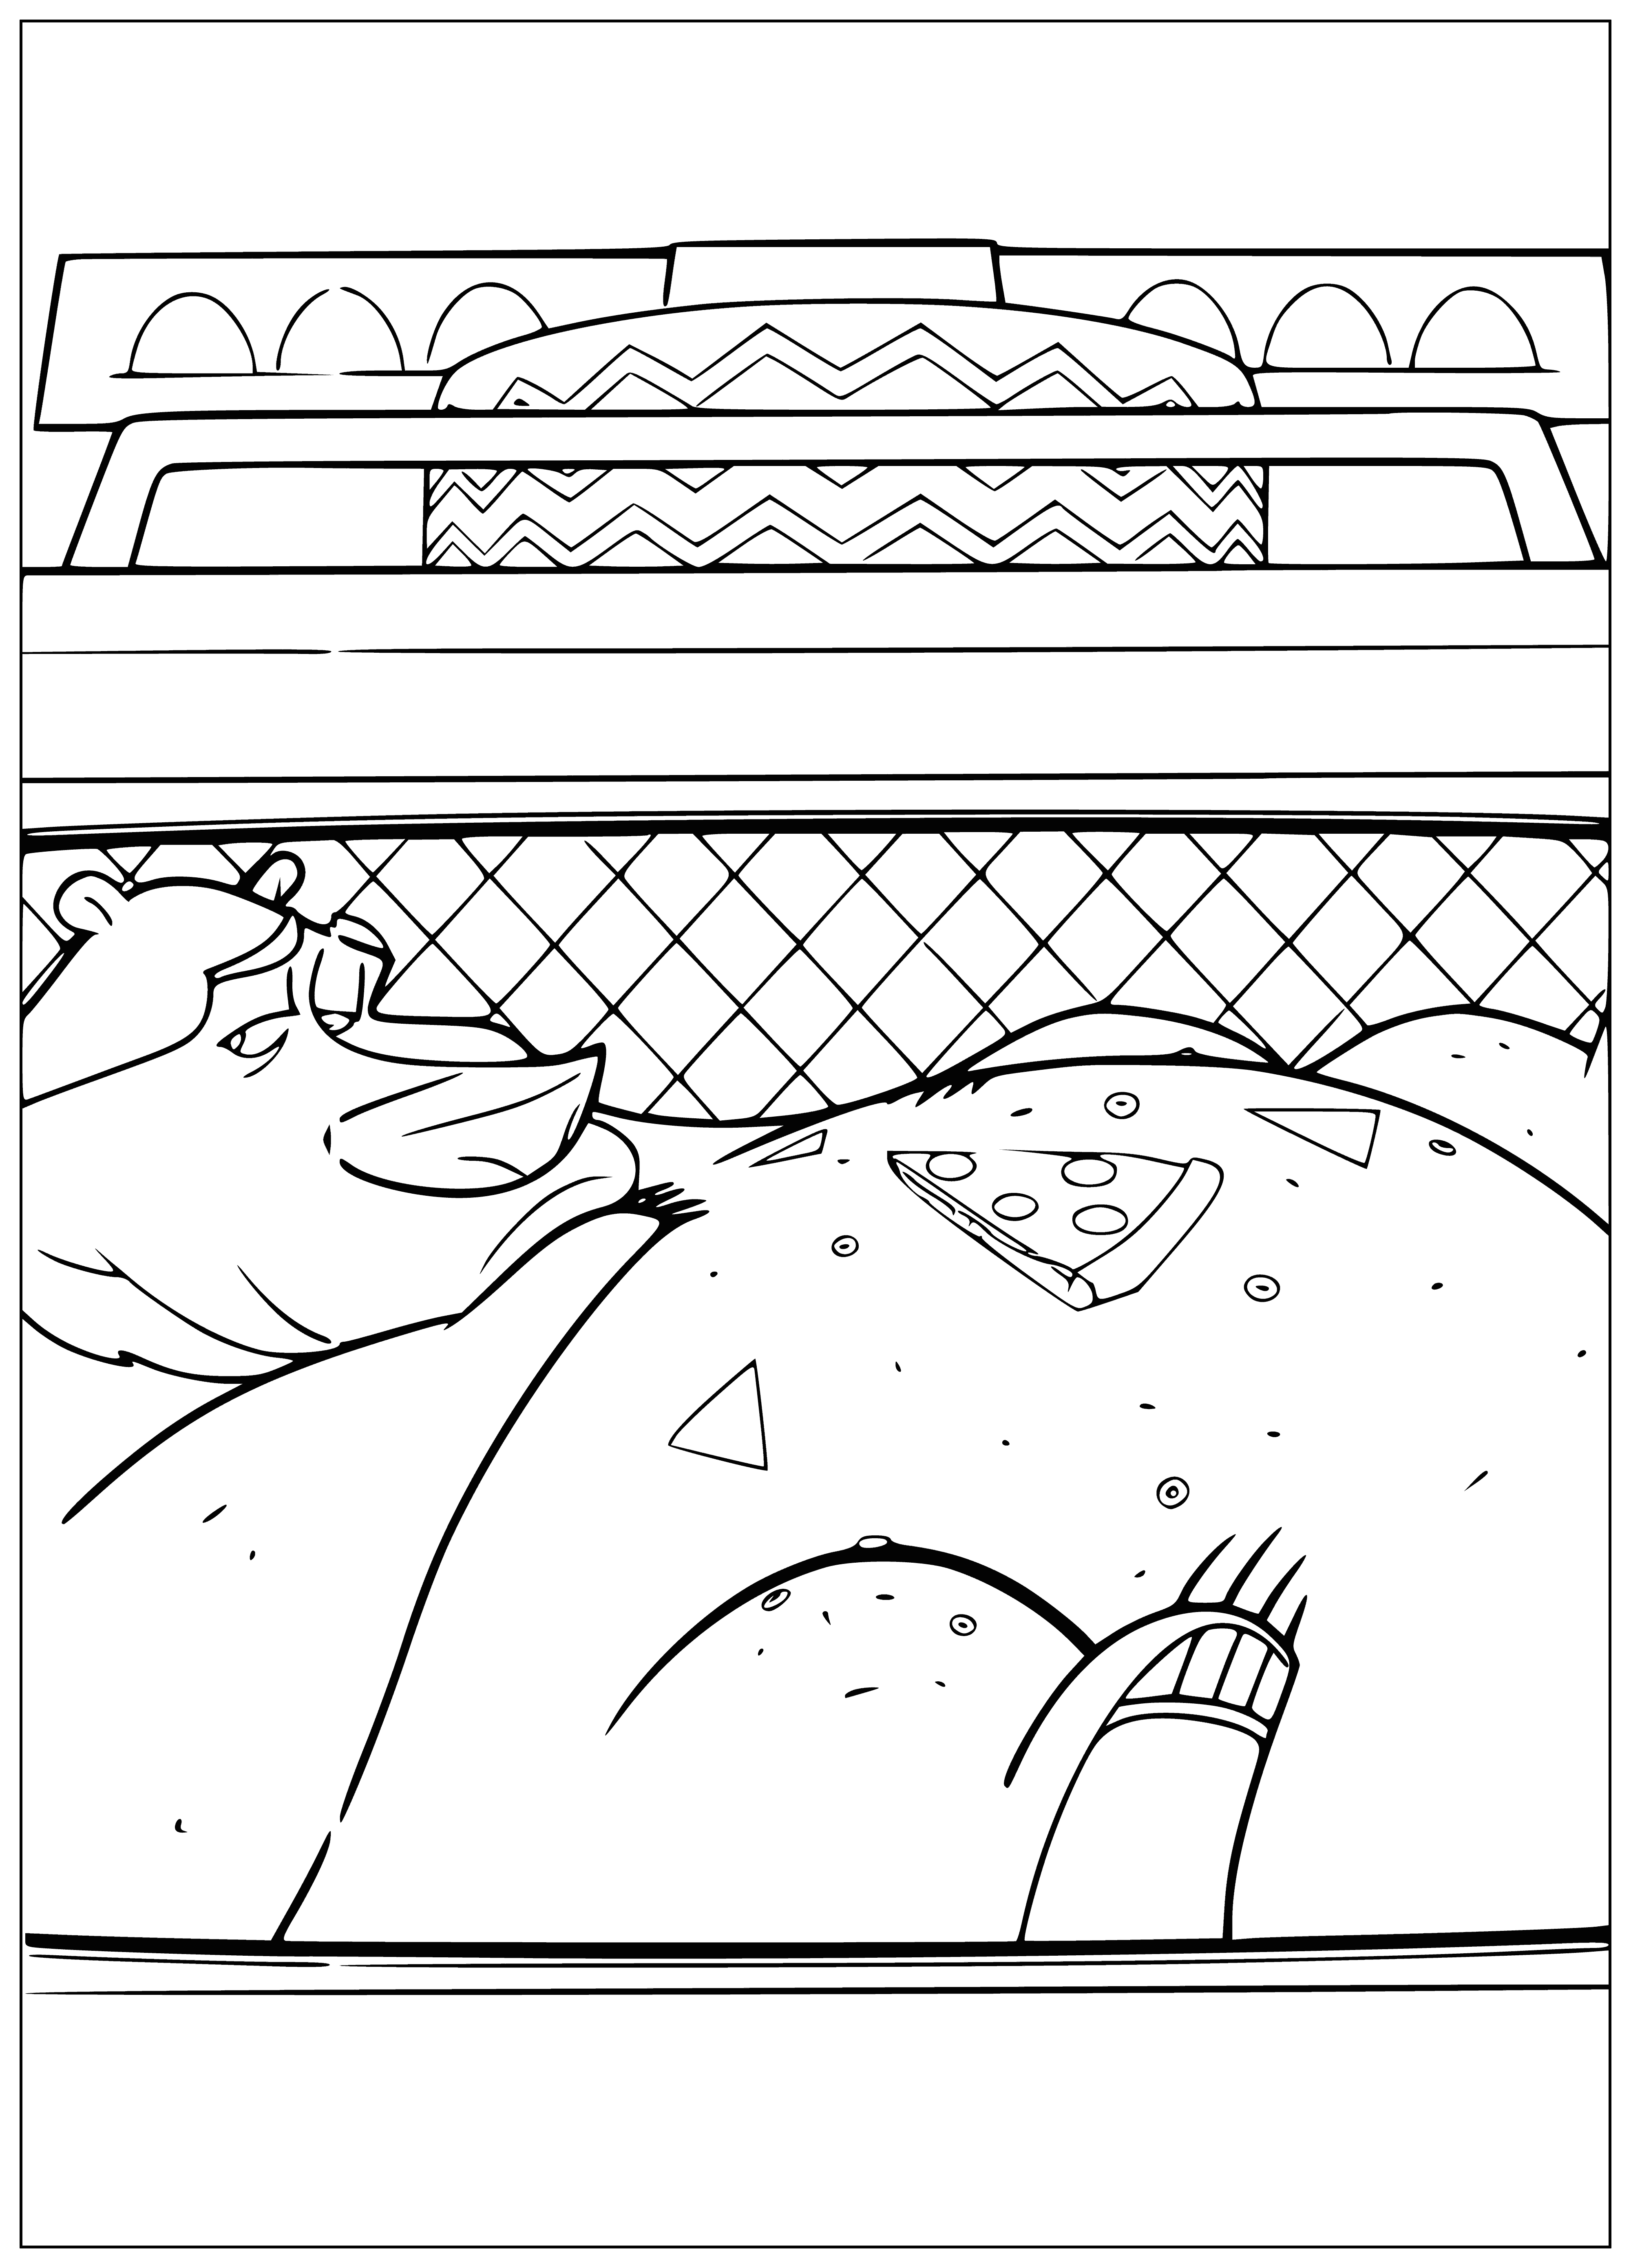 coloring page: Police officer arrests bear, handcuffs it, points gun at it.